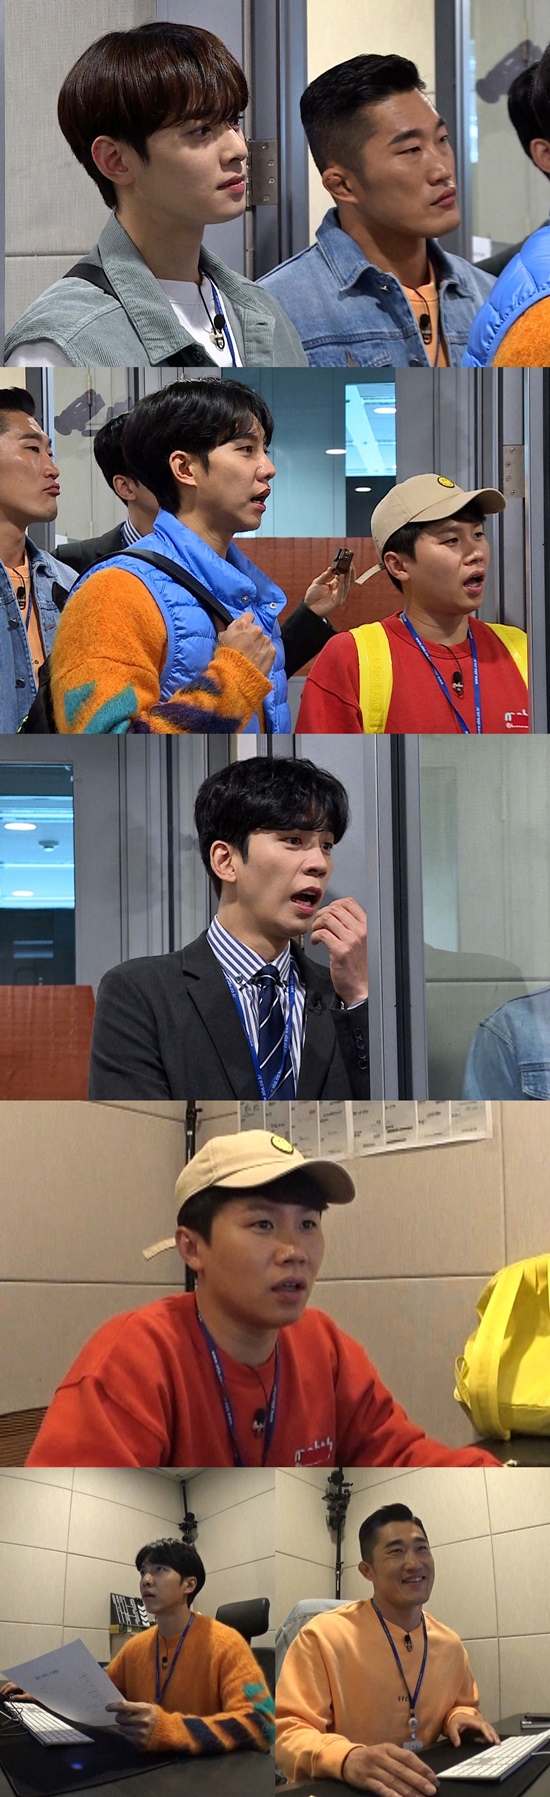 Members of All The Butlers fall into a menbungOn SBS All The Butlers, which will be broadcast on the 26th, Lee Seung-gi, Shin Sung-rok, Yang Se-hyeong, Cha Eun-woo and Kim Dong-Hyuns pretty ability will be released.Last week, All The Butlers was featured as a 24 oclock special feature on the station, and Lee Seung-gi, Shin Sung-rok, Yang Se-hyeong and daily students Cha Eun-woo and Kim Dong-Hyun participated in the production process of I want to know and SBS 8 News.Members will visit the Arts Bureau this time, following the Cultural and Press Bureau.The members are interested in the editing mission ahead of the final interview with the director of the entertainment department, which is the final stage of the interview with SBS new employees at the entertainment department.Mission is to participate directly in editing the opening video of All The Butlers.Kim Dong-Hyun and Cha Eun-woo, who have been thoroughly self-centered editing since Lee Seung-gi, who has been in a bad situation, will be released with full-fledged editing videos of five men.In particular, Yang Se-hyeong listened to his comment while editing and said, Yang Se-hyeong! Do not say anything.) I was laughing because I reflected on myself. In addition, CP, who watched Kim Dong-Hyuns edited video, praised him for saying, I thought I was breathing.Also, the broadcast will be more anticipated because the live broadcast of SBS 8 News, including sports news and radio broadcasting, will reveal all the vivid scenes of Top Model members.Meanwhile, All The Butlers will be broadcast at 6:25 pm on the 26th.Photo = SBS